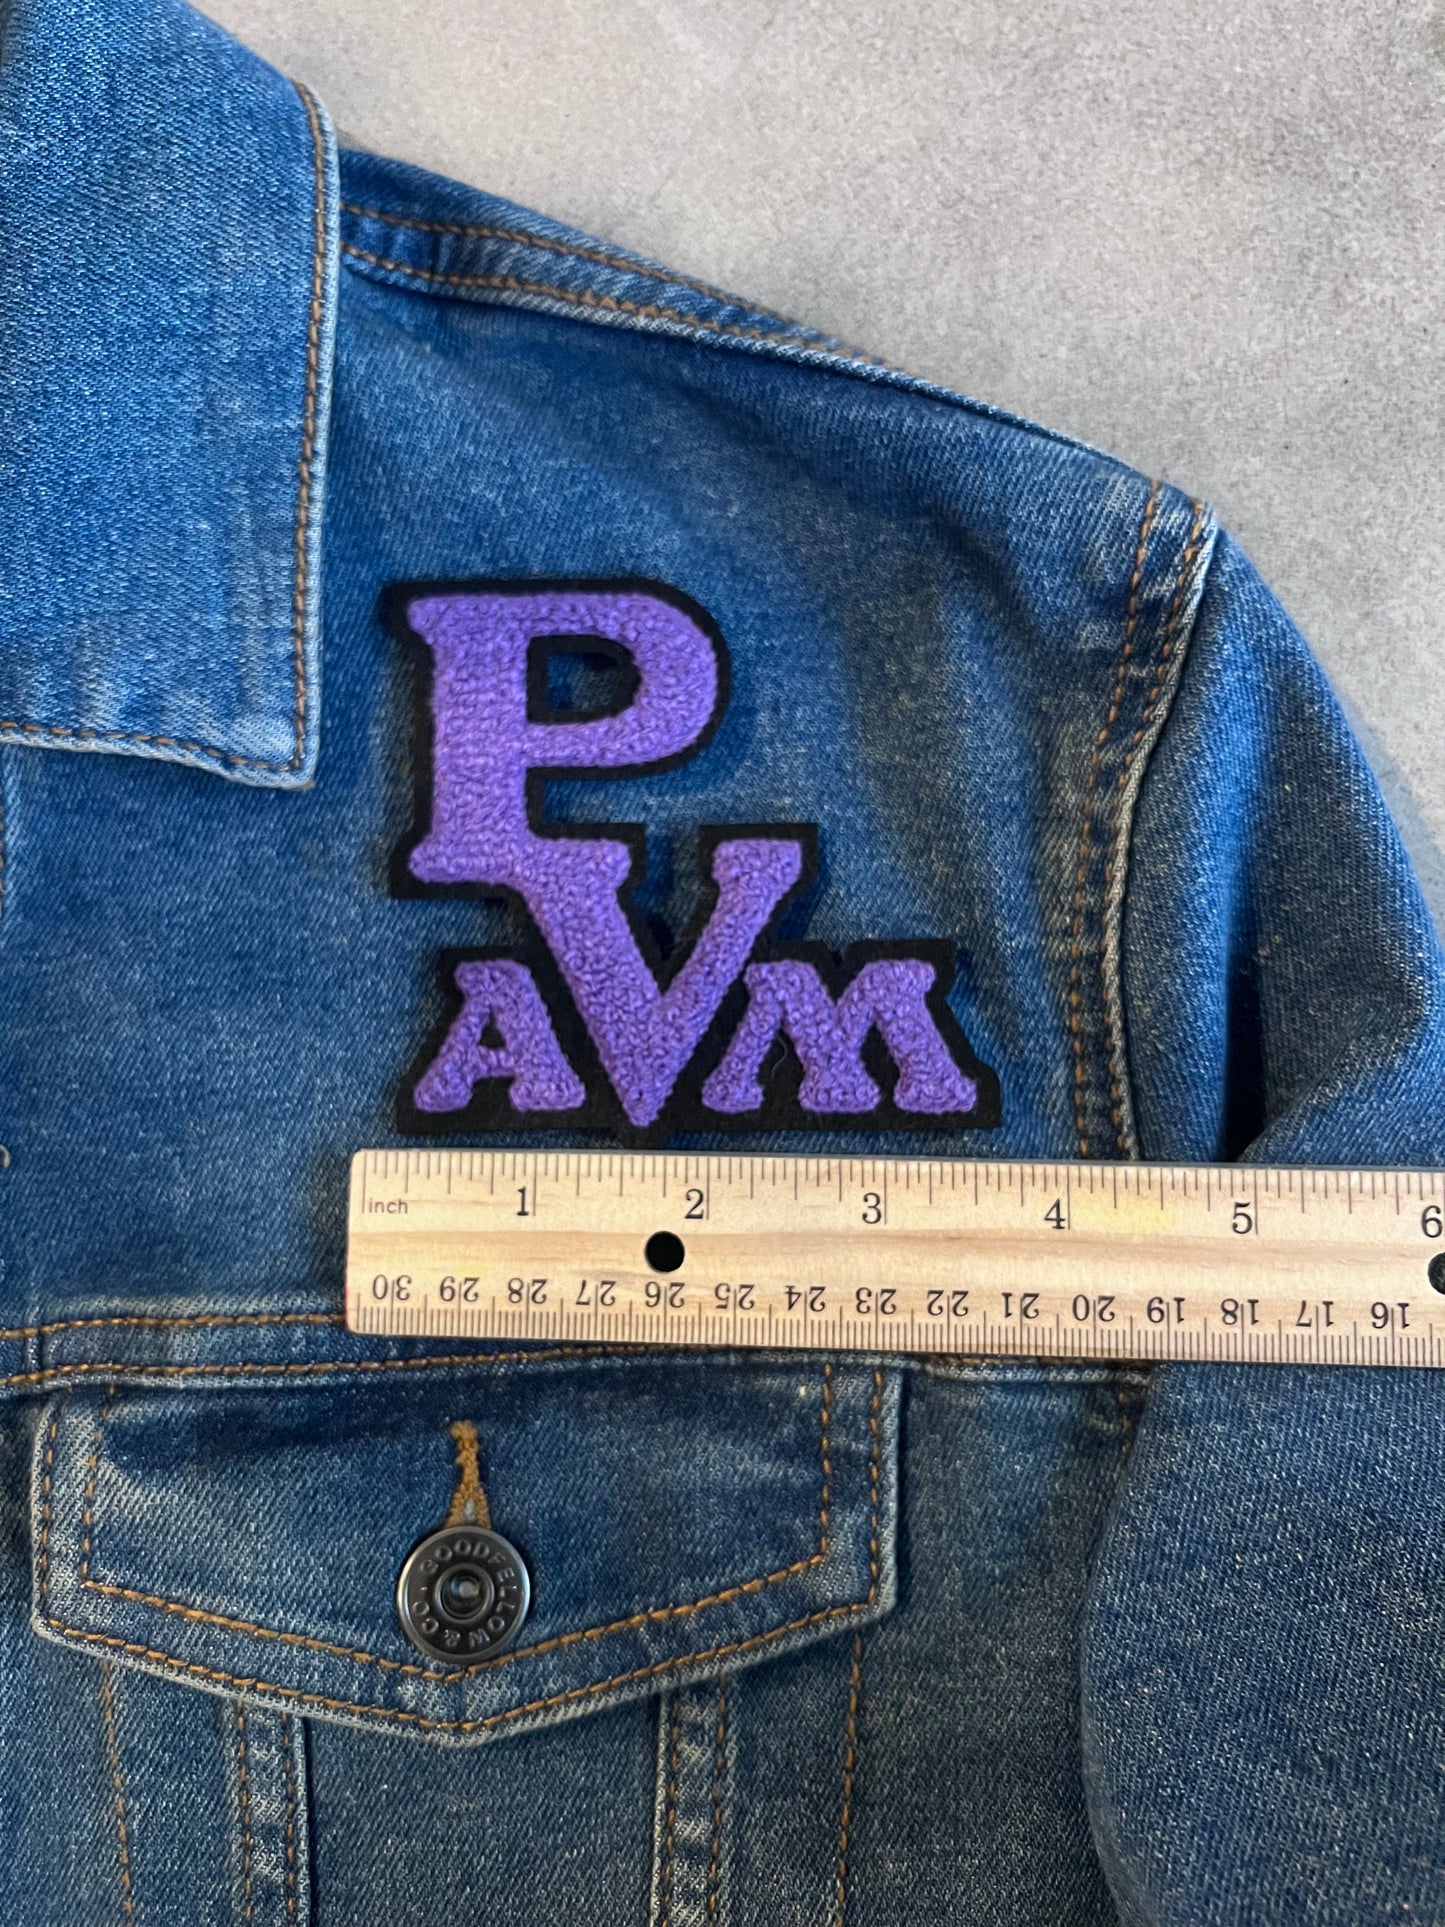 Prarie View A & M University Chenille patch